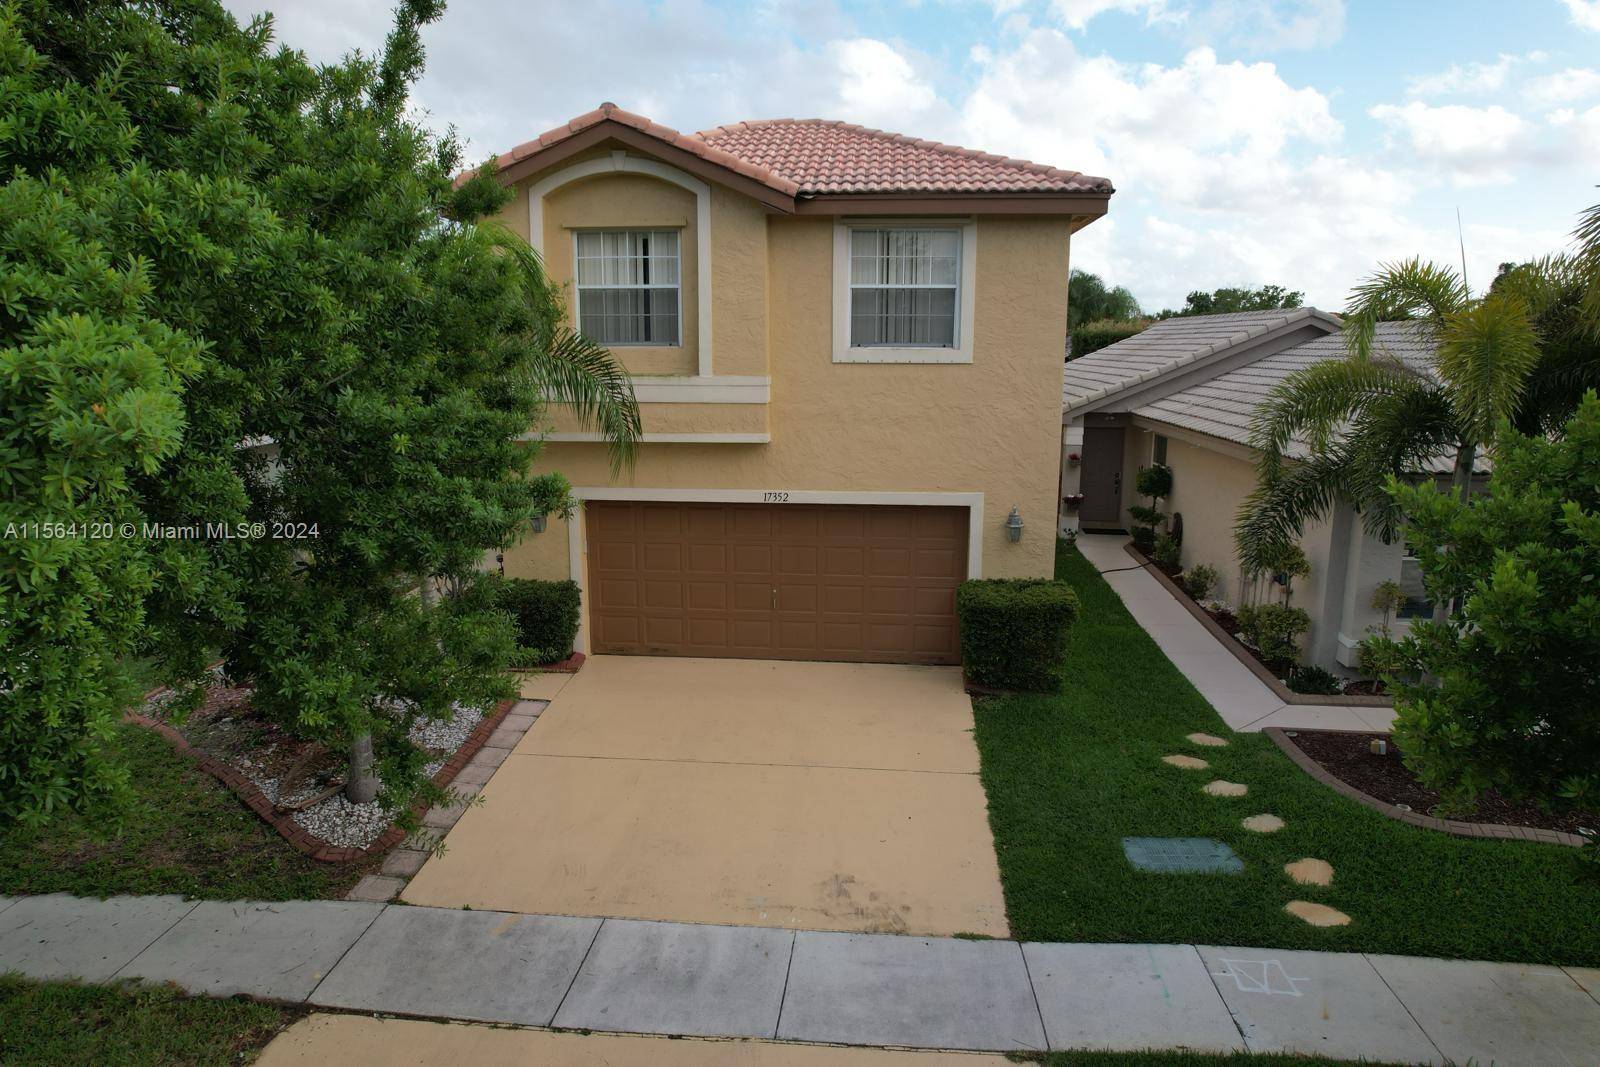 Beautiful 5 bedrooms 2. 5 bathrooms, two story home with a pool located in the prestigious Silver Lakes community.